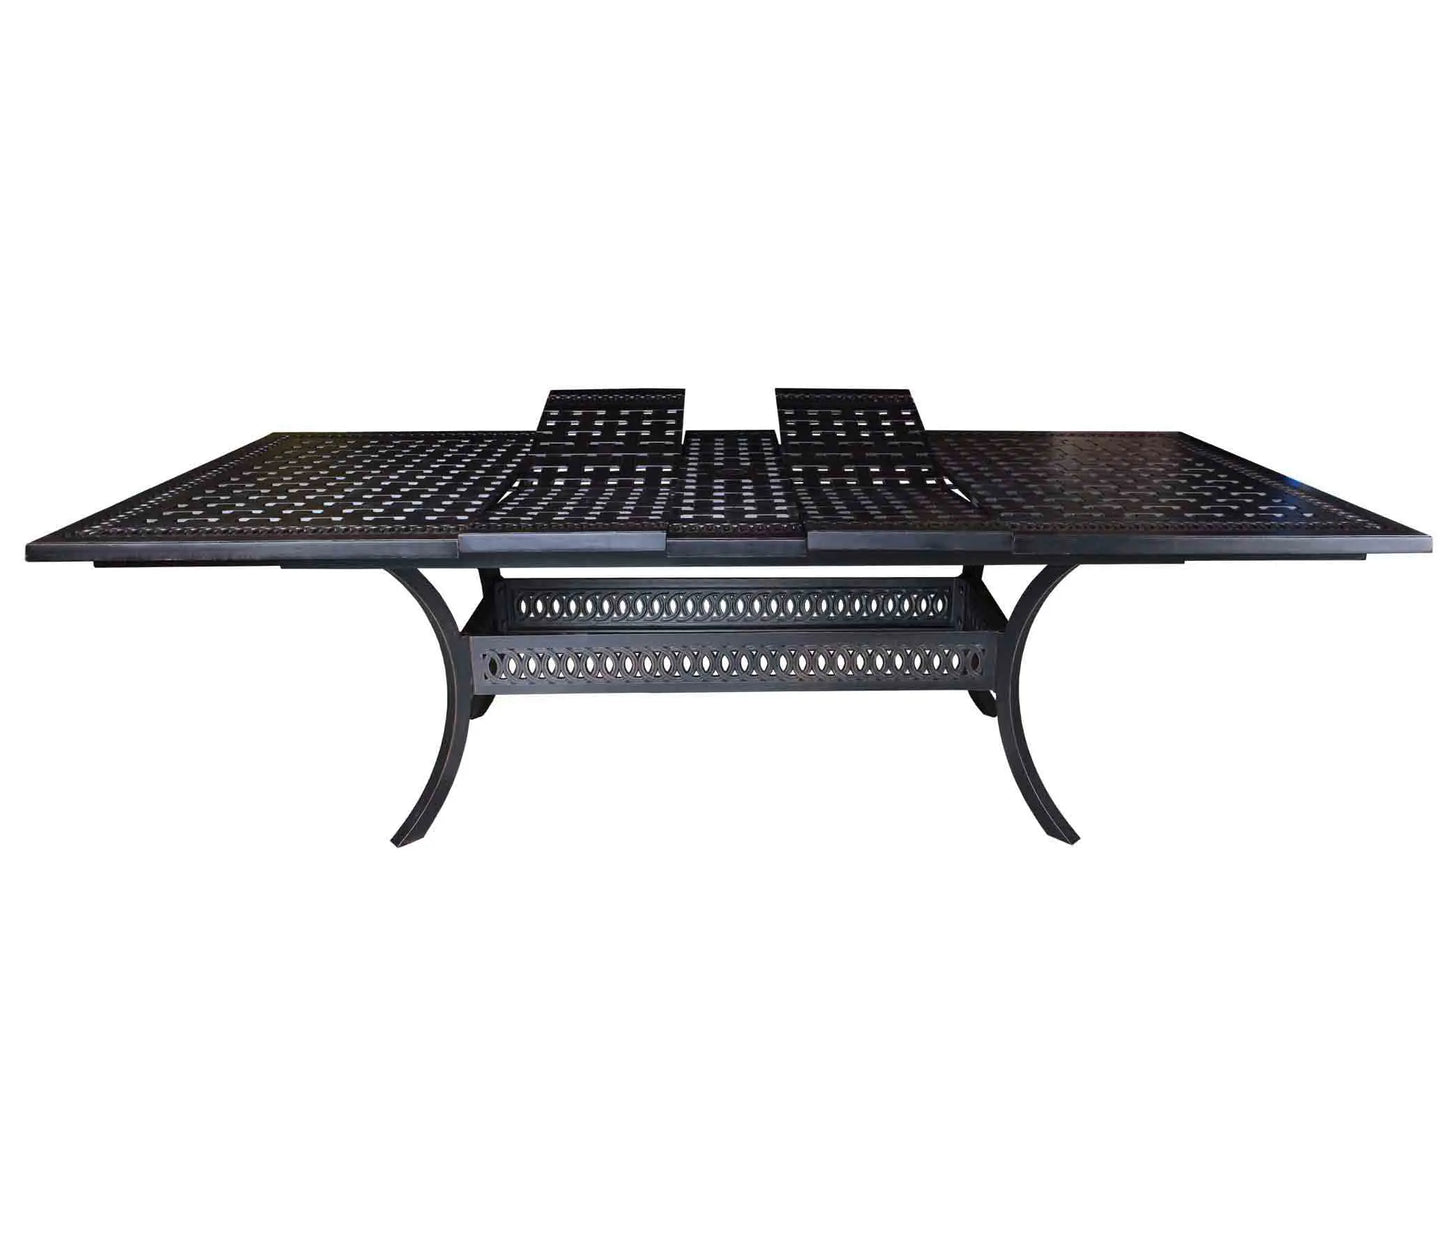 Pure 44" x 74" to 102" Extending Dining Table